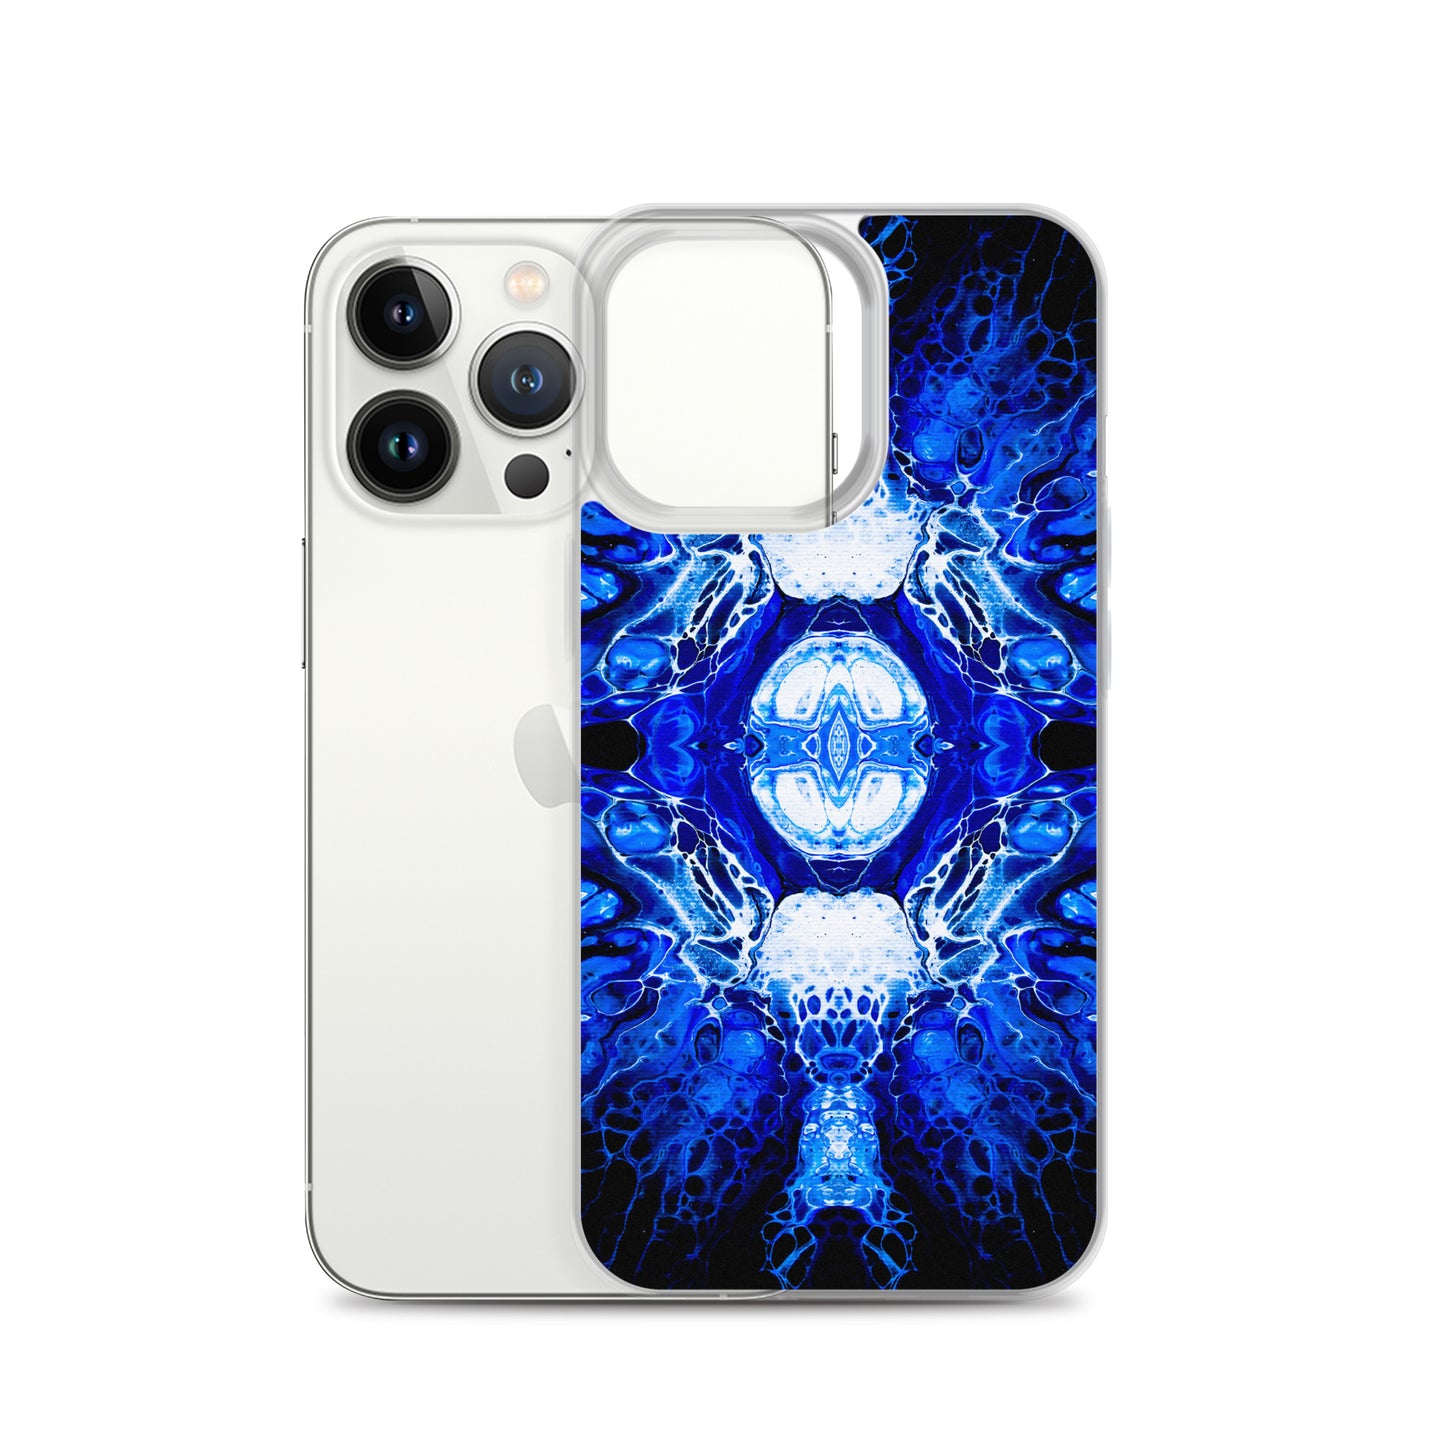 NightOwl Studio Custom Phone Case Compatible with iPhone, Ultra Slim Cover with Heavy Duty Scratch Resistant Shockproof Protection, Blue Nucleus